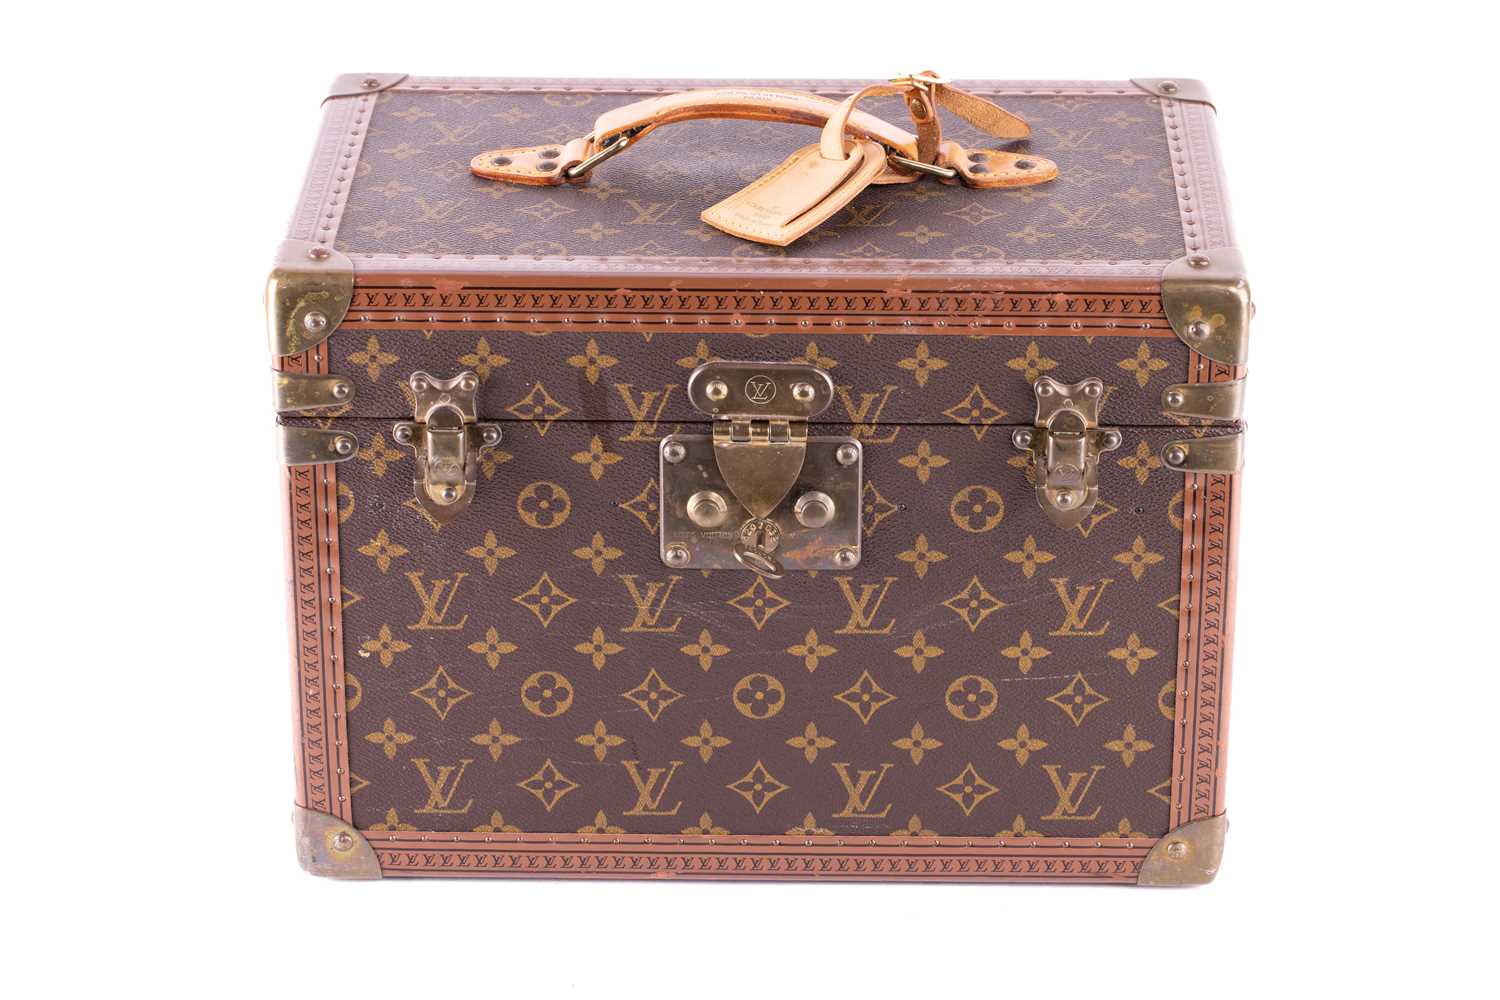 Louis Vuitton - a 'Boîte à Pharmacie' (pharmacy box) vanity case, in brown monogram canvas, brass lo - Image 3 of 15